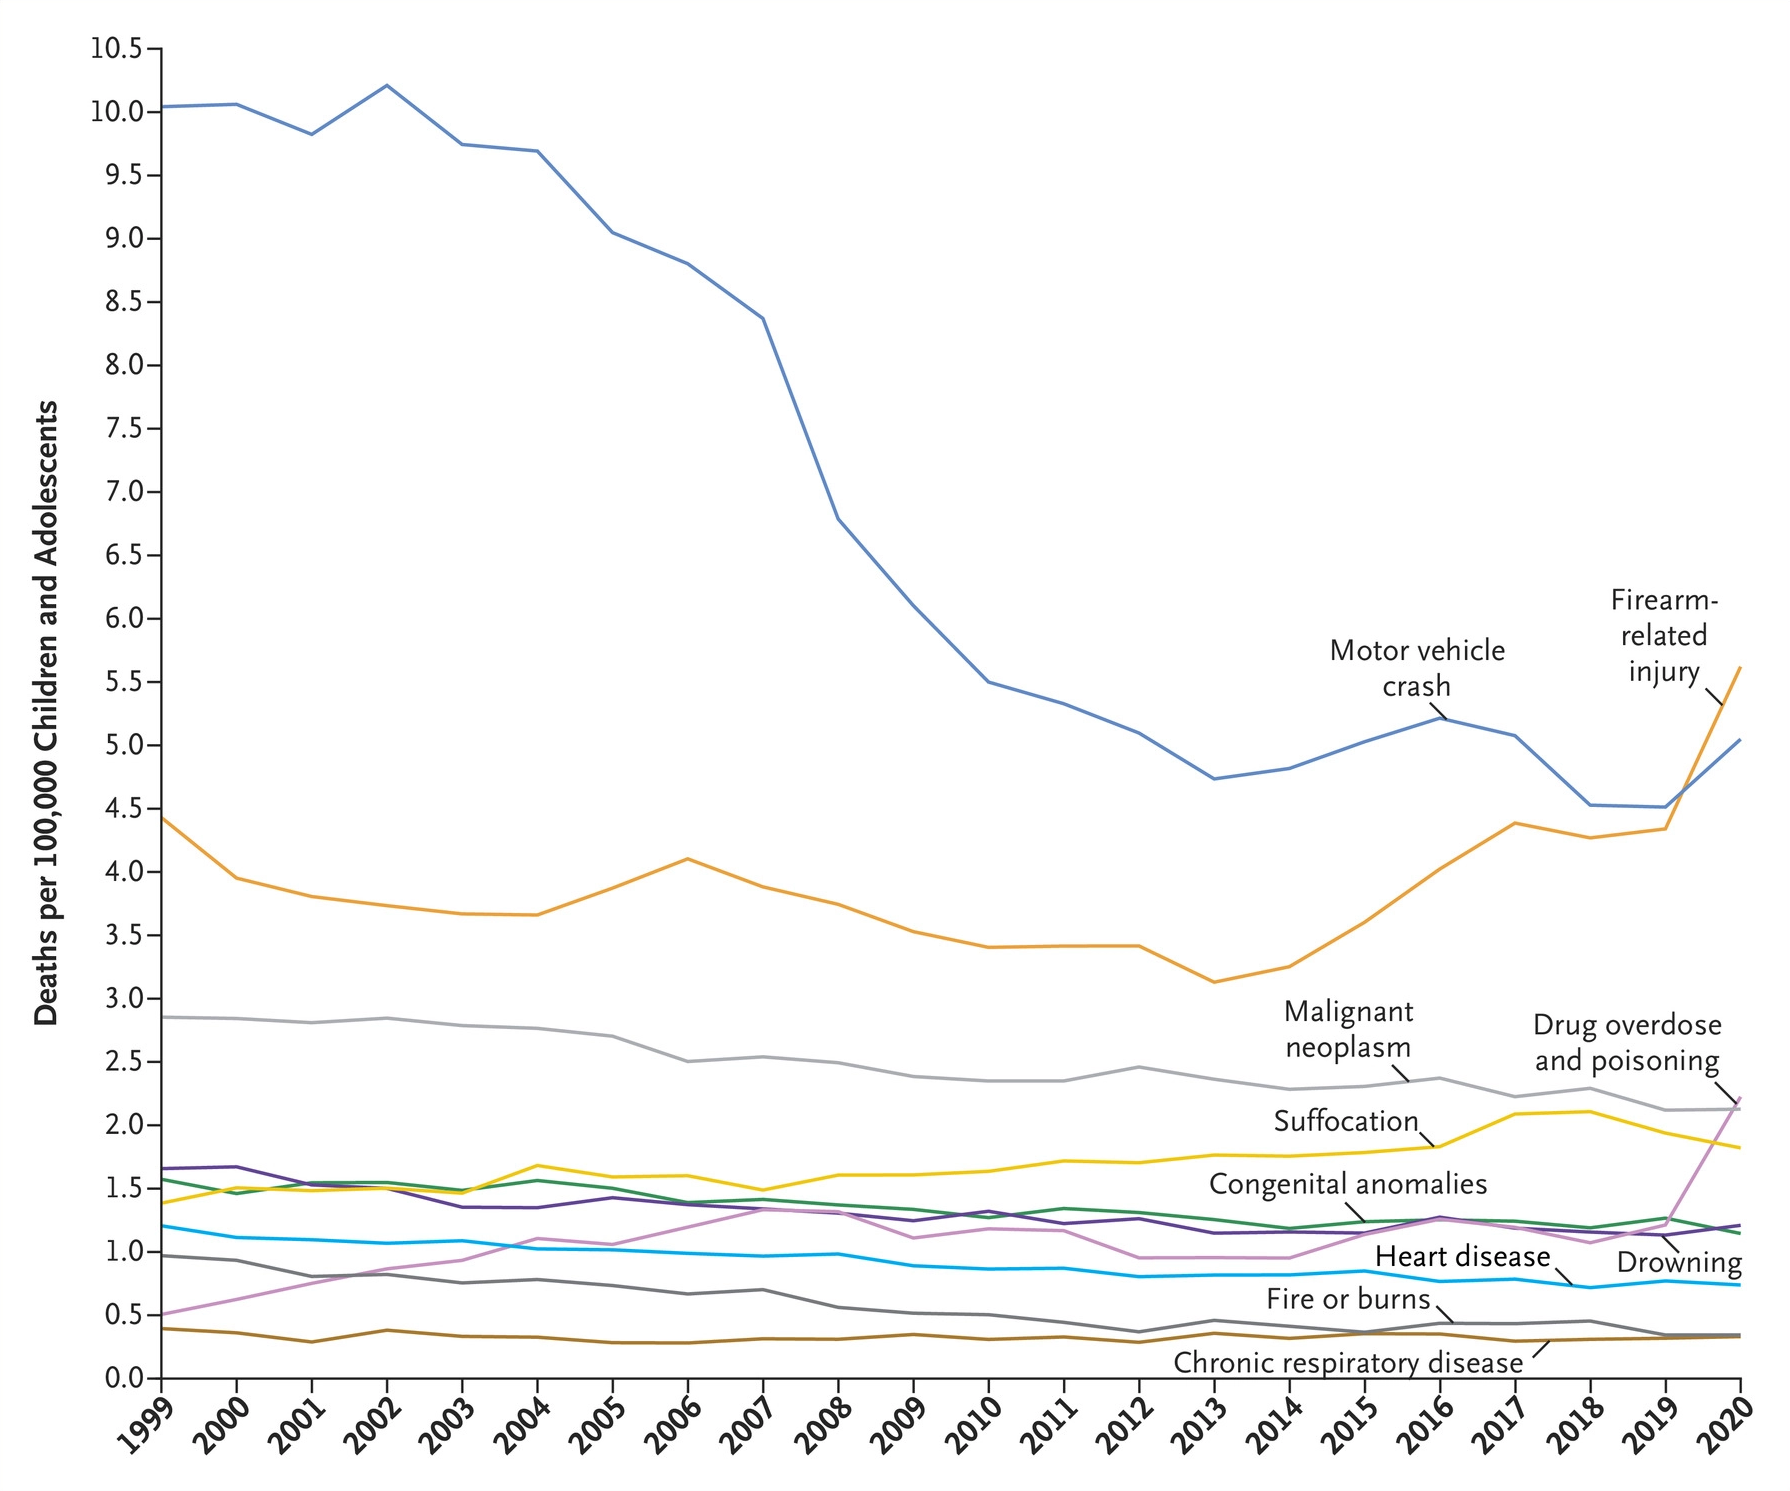 Leading causes of death among children and adolescents in the United States, 1999-2020. The Centers for Disease Control and Prevention (CDC) recently released updated official mortality data that showed 45,222 firearm-related deaths in the United States in 2020 — a new peak. It marks the first time since the CDC started recording leading causes of death among children that firearm-related injuries overtook motor vehicle crashes as the No. 1 cause. Children and adolescents are defined as persons 1 to 19 years of age. Data: CDC WONDER. Graphic: Goldstick, et al., 2022 / New England Journal of Medicine